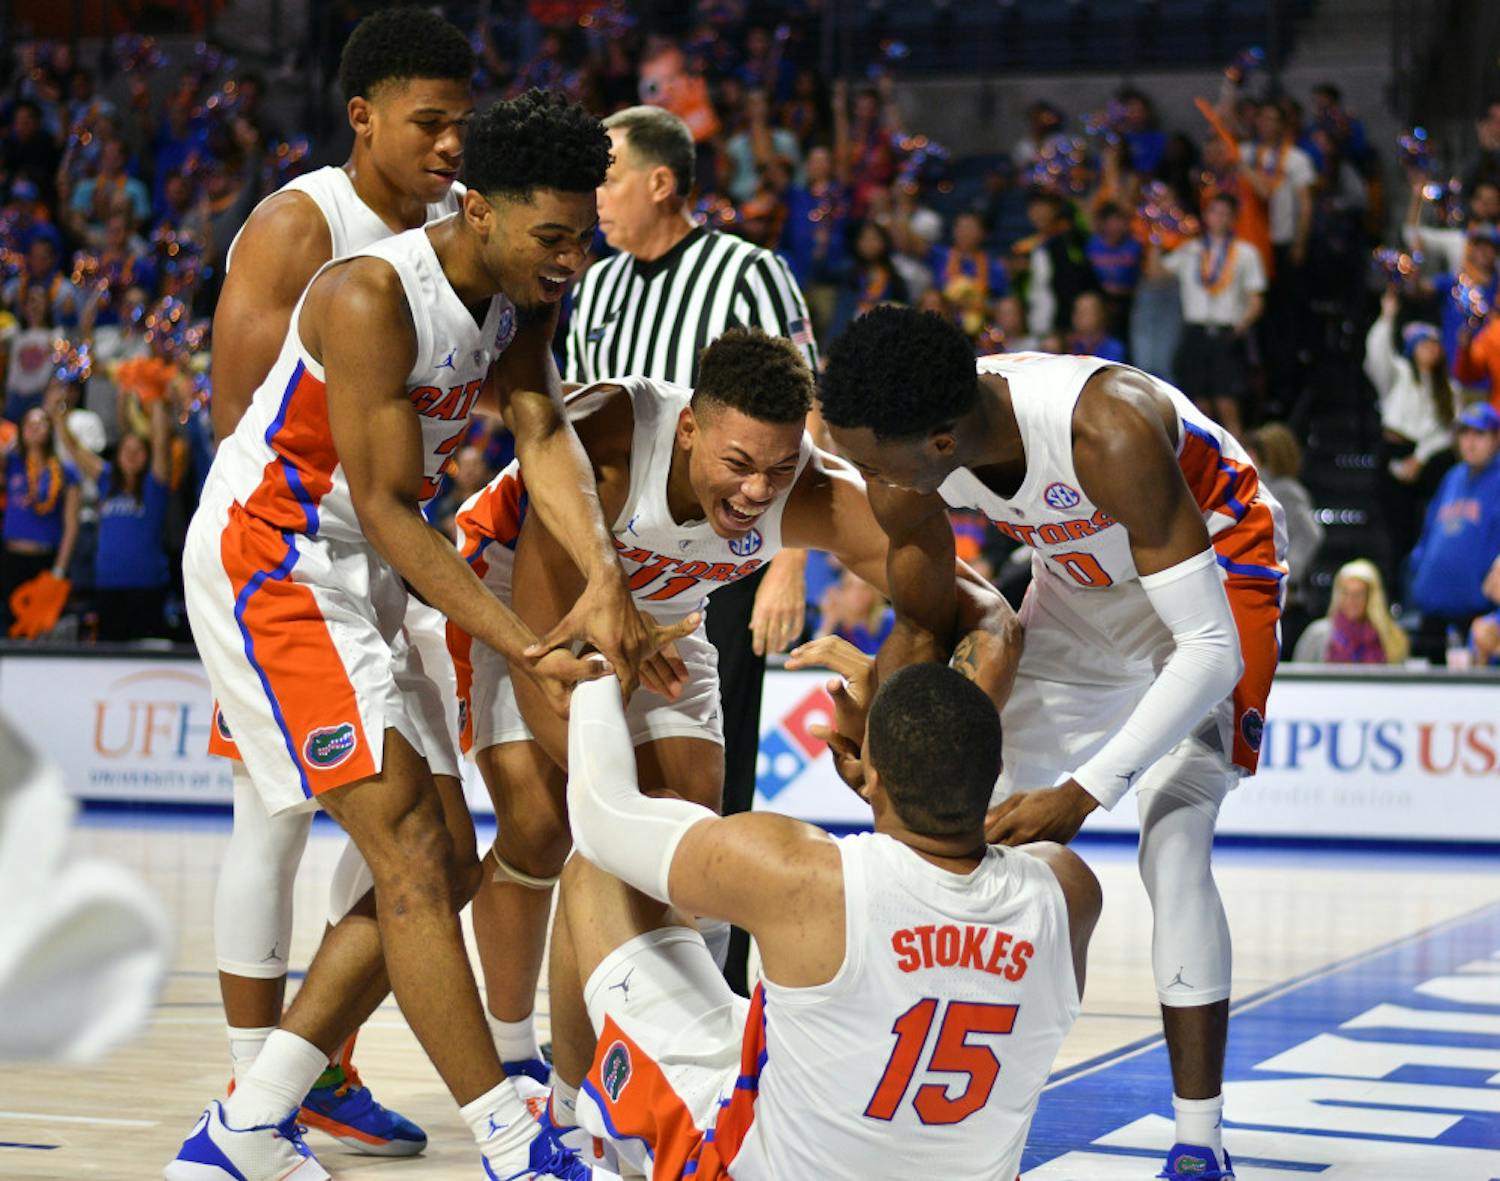 UF guard Jalen Hudson (second from left) averaged 9.3 points per game this season. In the last six games of the year, he averaged 12.5. 